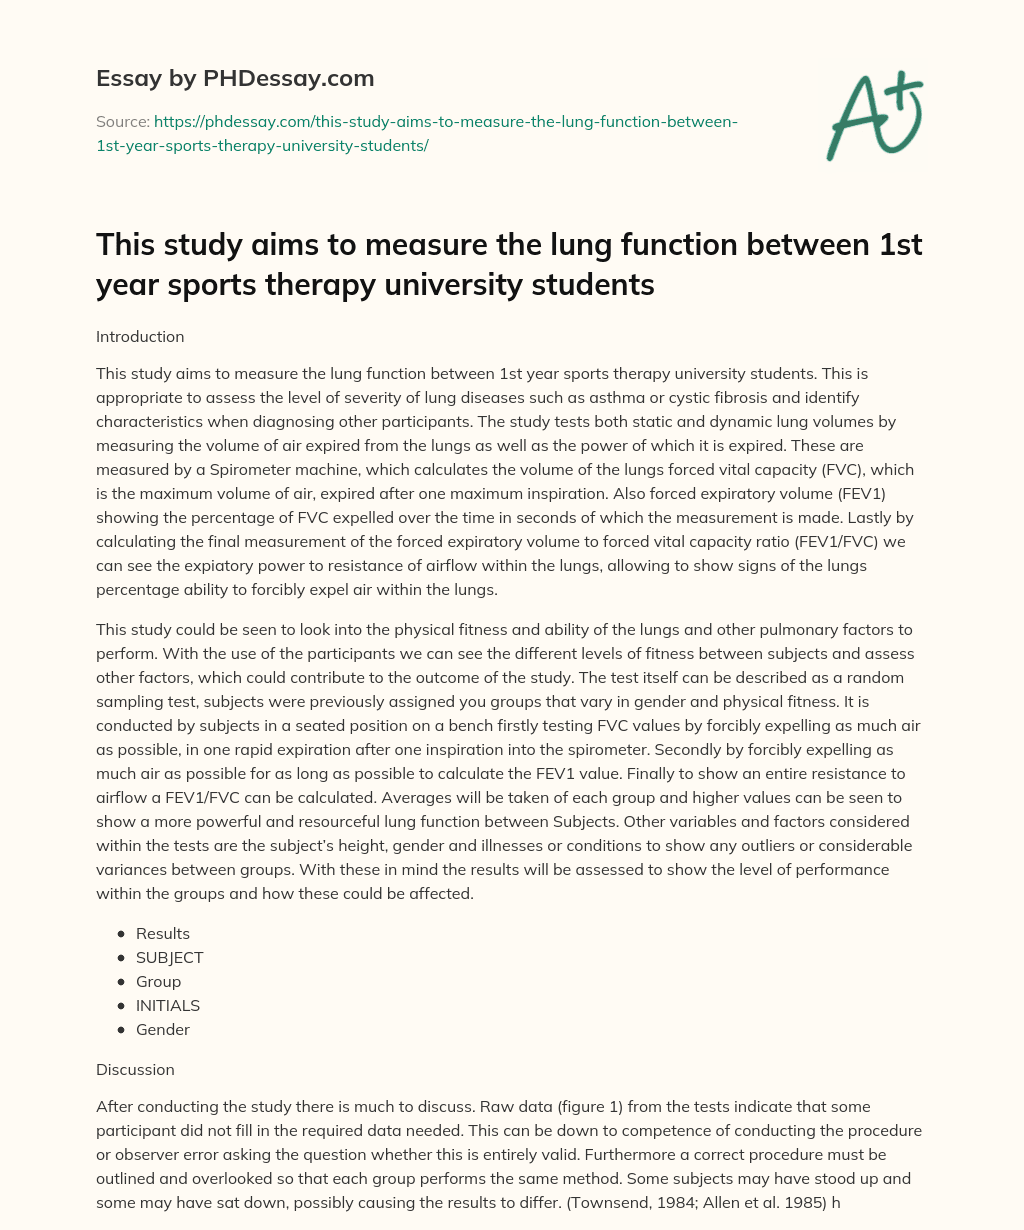 This study aims to measure the lung function between 1st year sports therapy university students essay